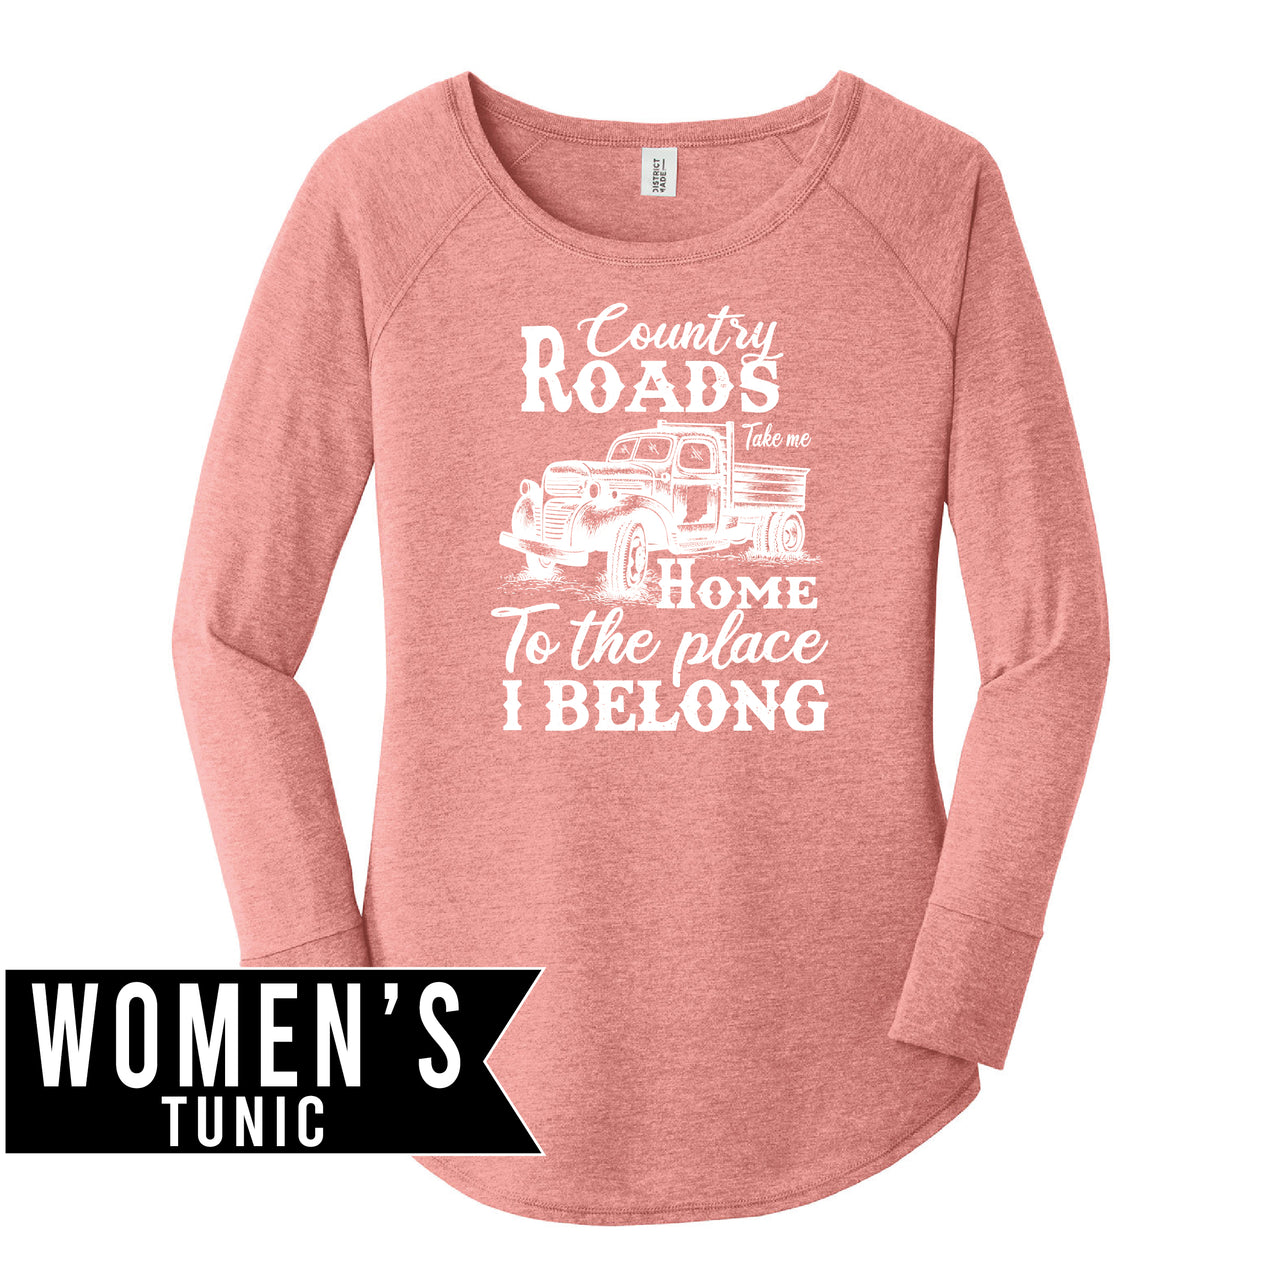 Women’s Perfect Tri Long Sleeve Tunic Tee - Indiana Country Roads